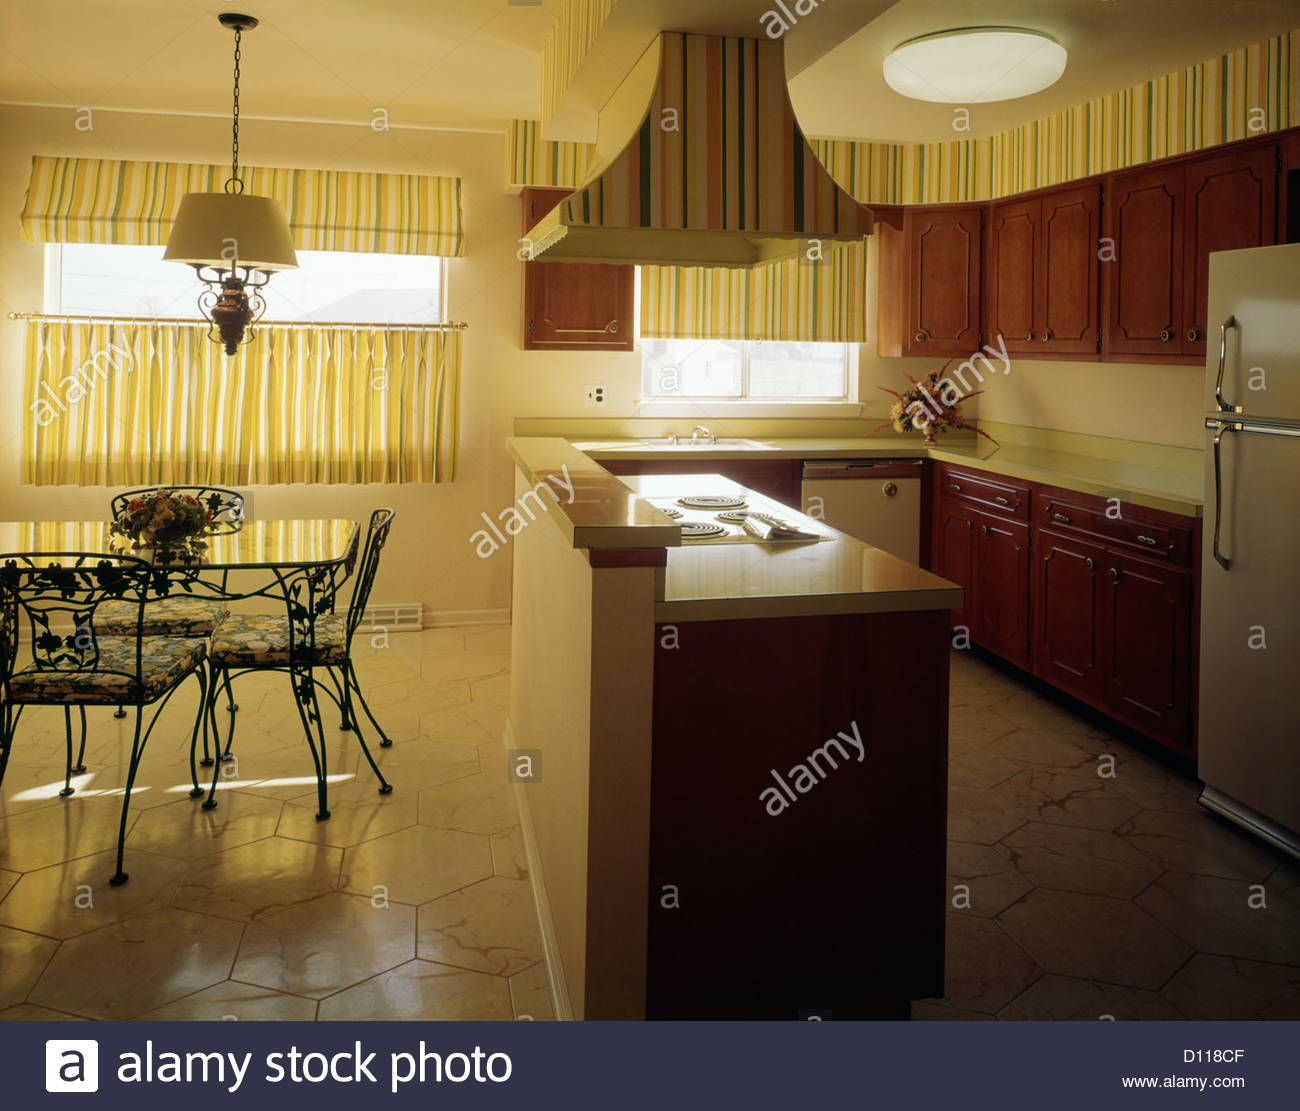 1970s Kitchen And Dining Area With Yellow Striped Curtains